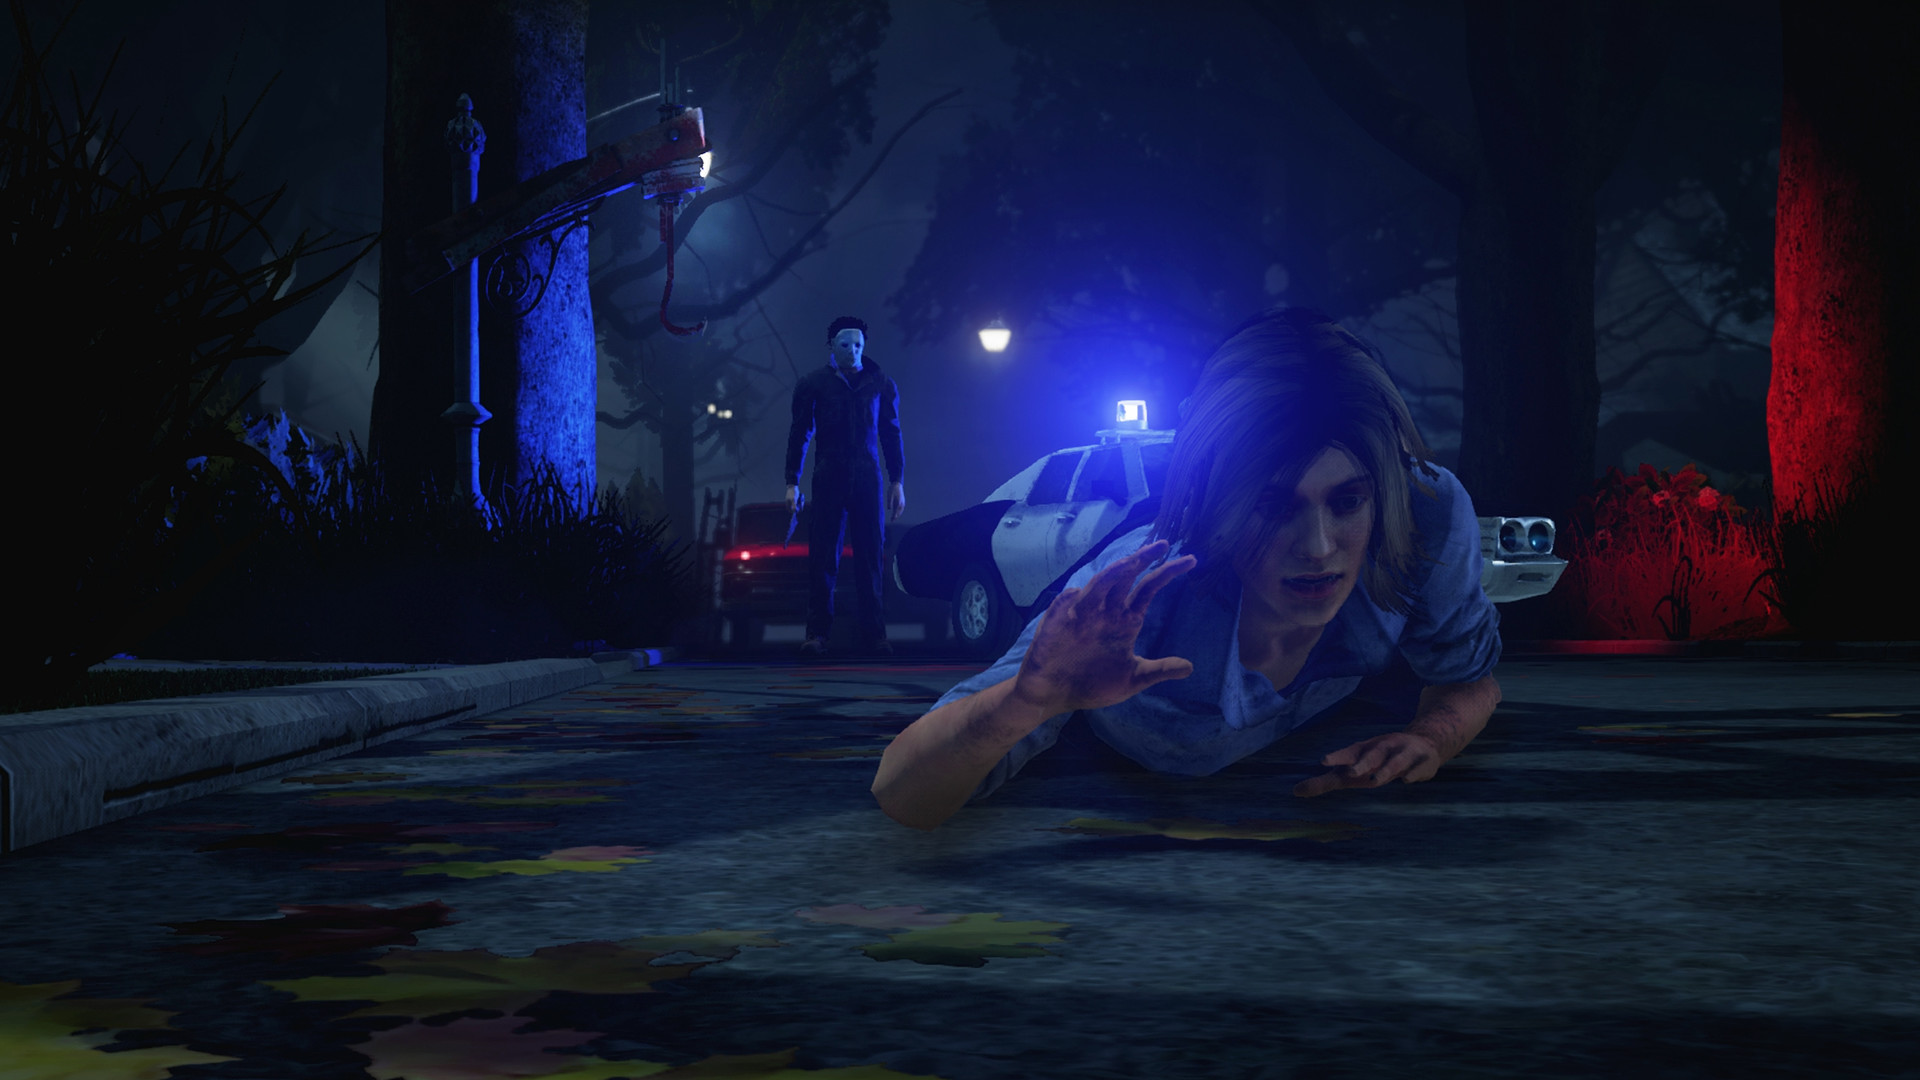 dead by daylight mid chapter 6.1.0 featured image live